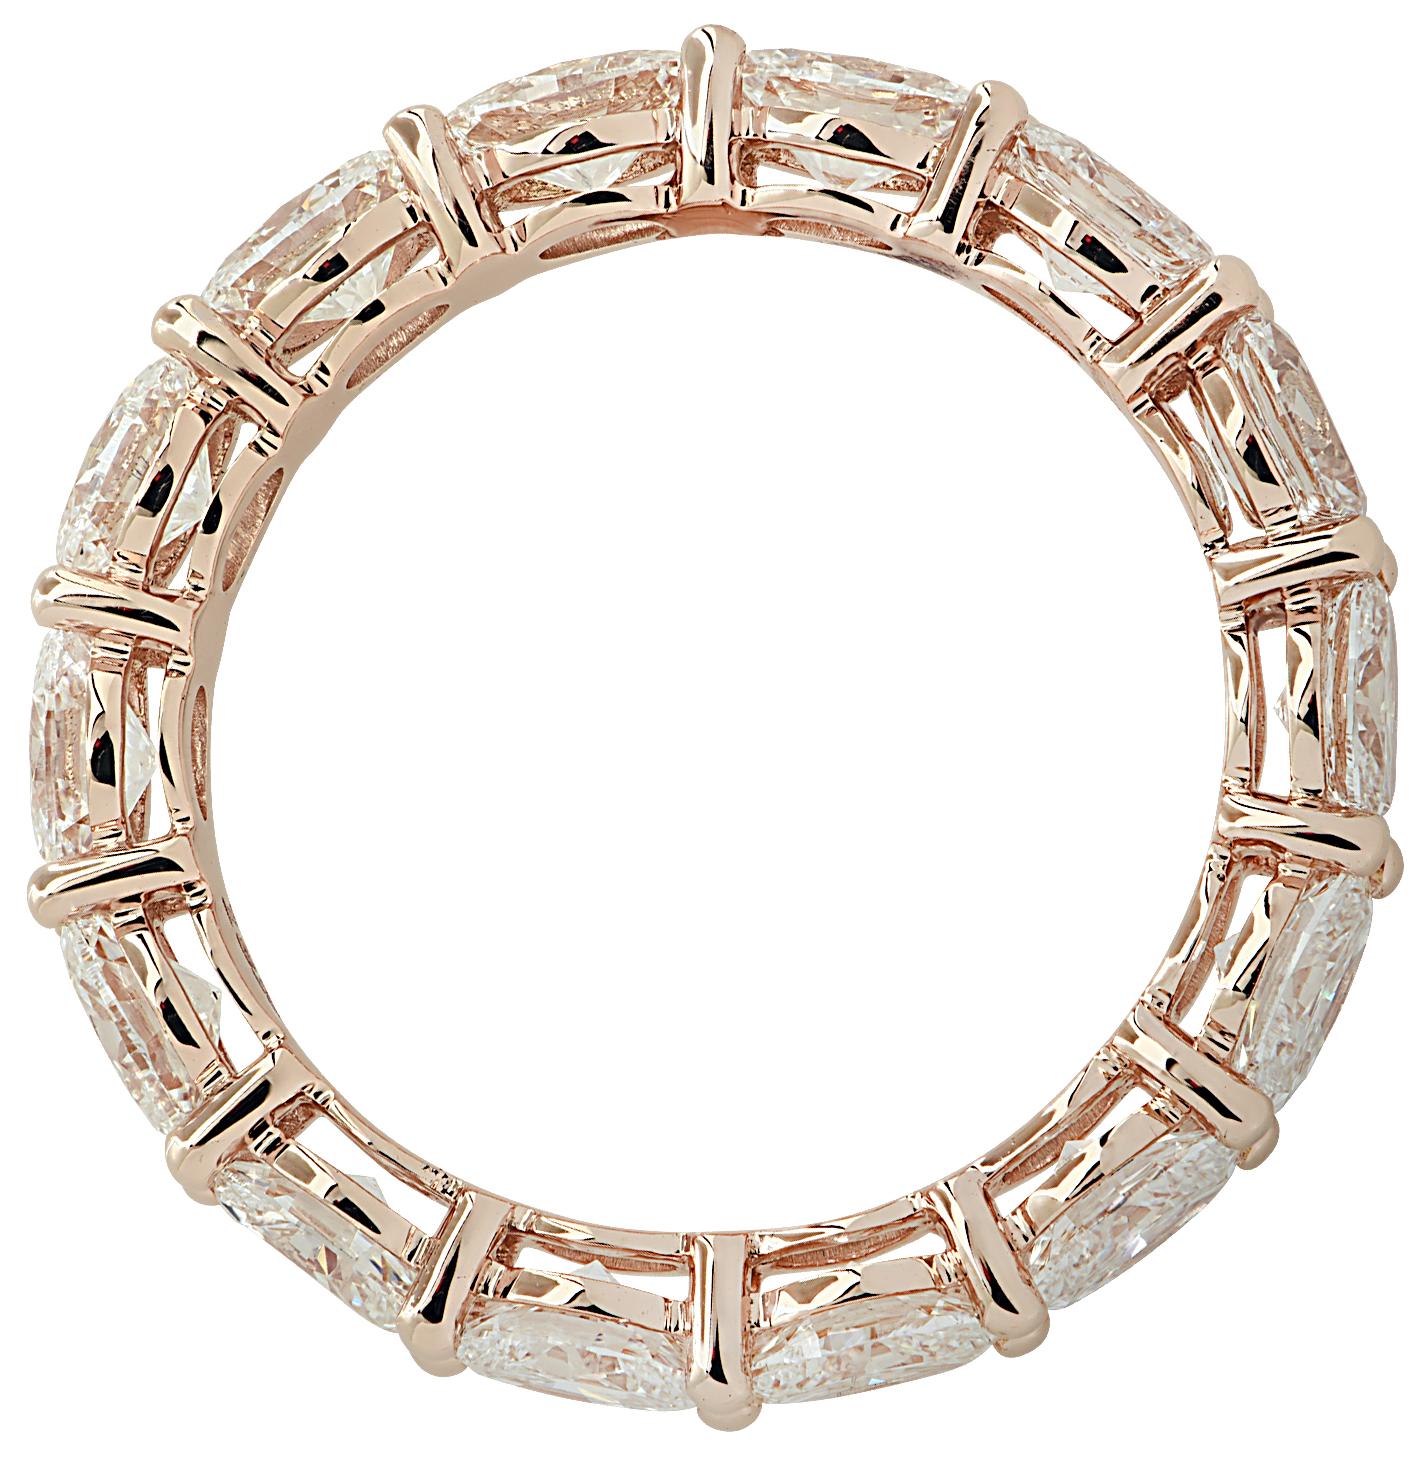 Stunning Vivid Diamonds East-West Eternity Band crafted in 18 karat Rose Gold, featuring 14 oval cut diamonds weighing 2.65 carats total, D-E color, VVS clarity. These fine diamonds are seamlessly set, east-west, in a modern take on the classic